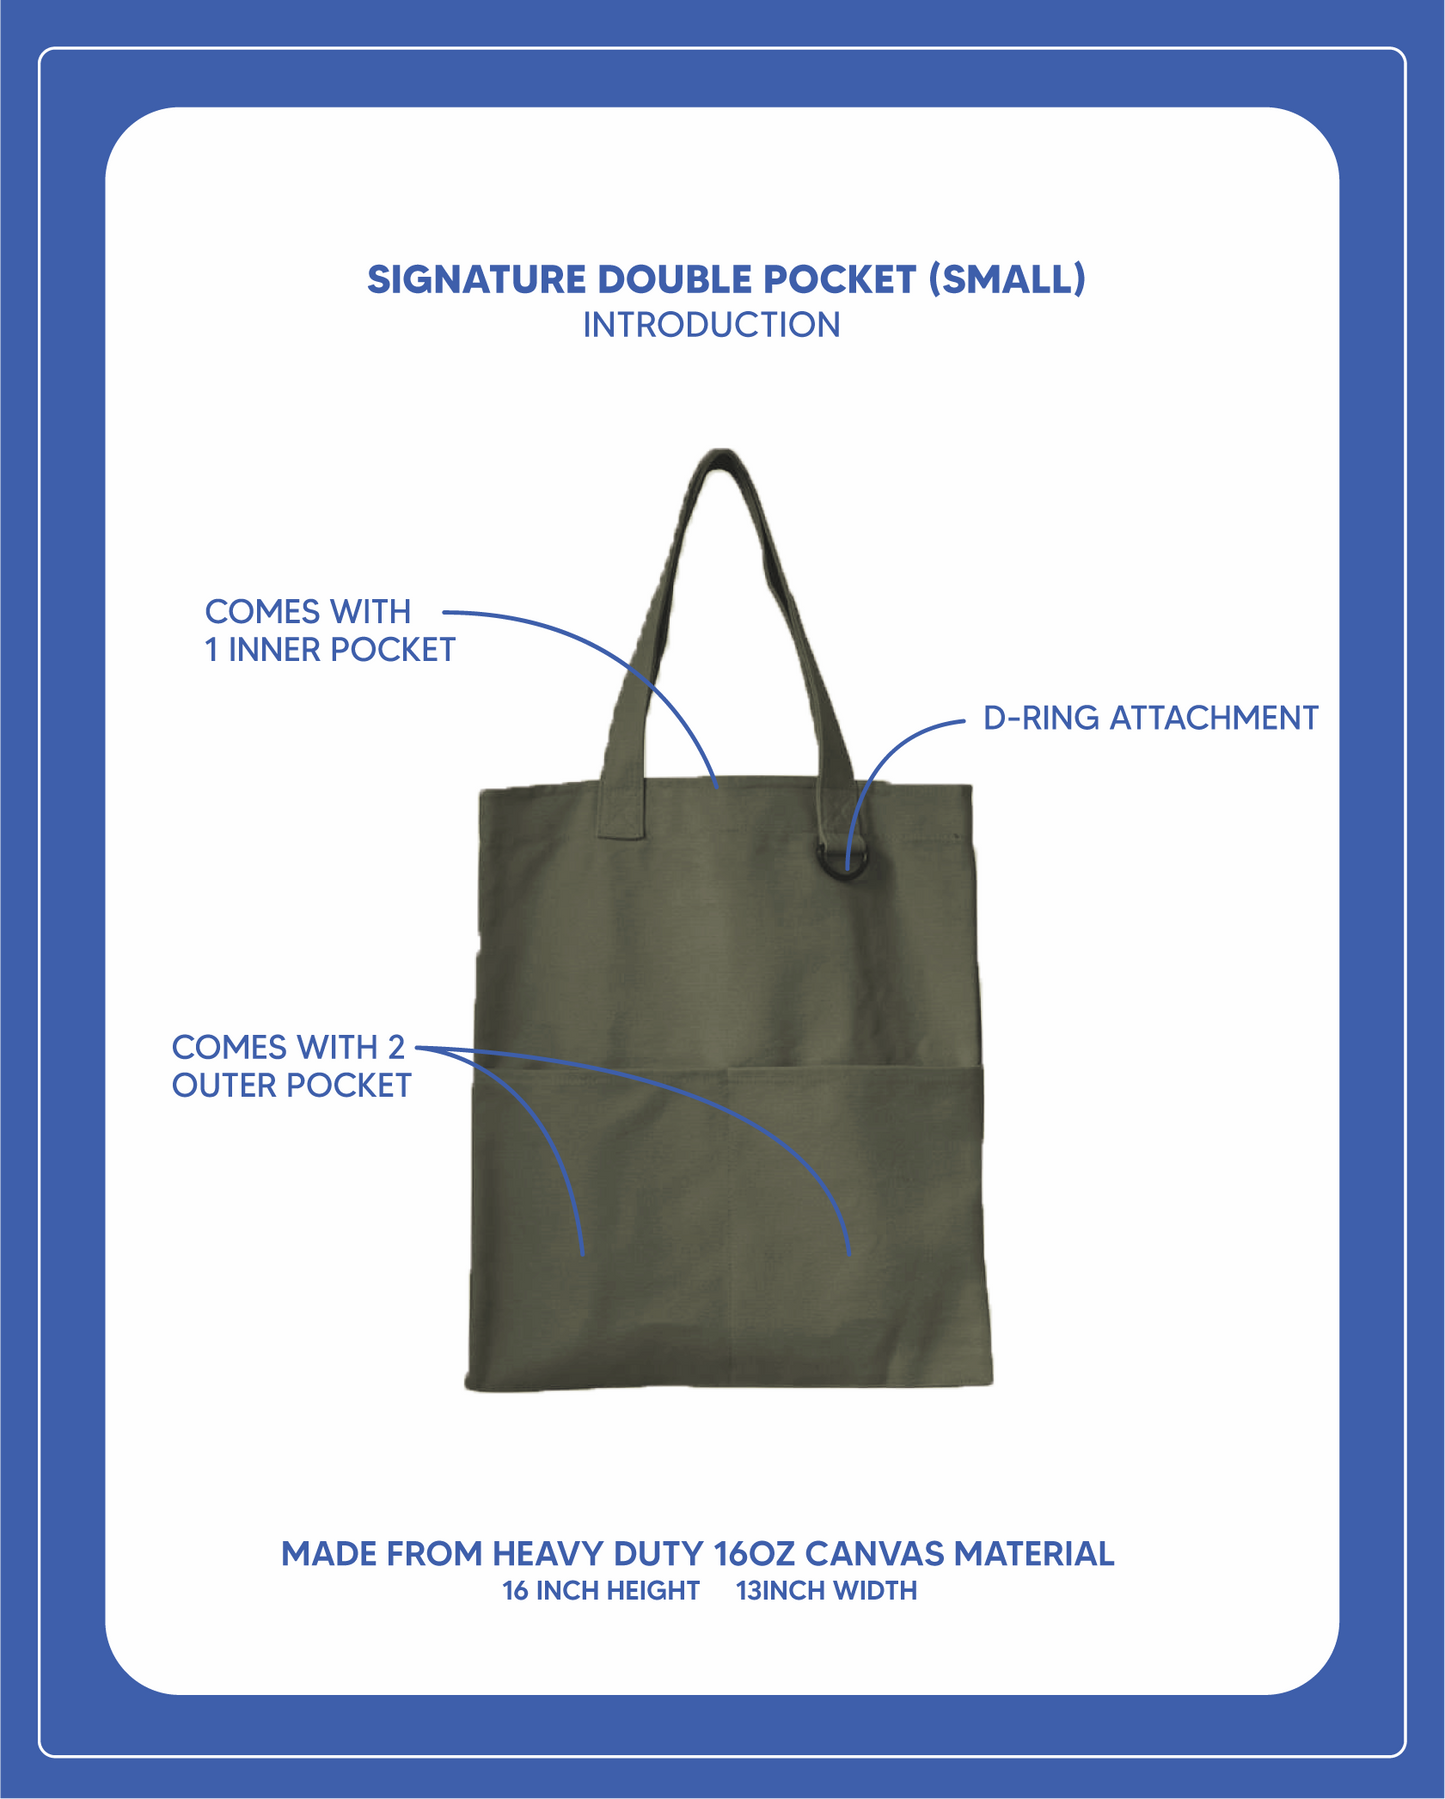 (LIMITED RUN) Double Pocket Signature Tote (Small) - Army Green